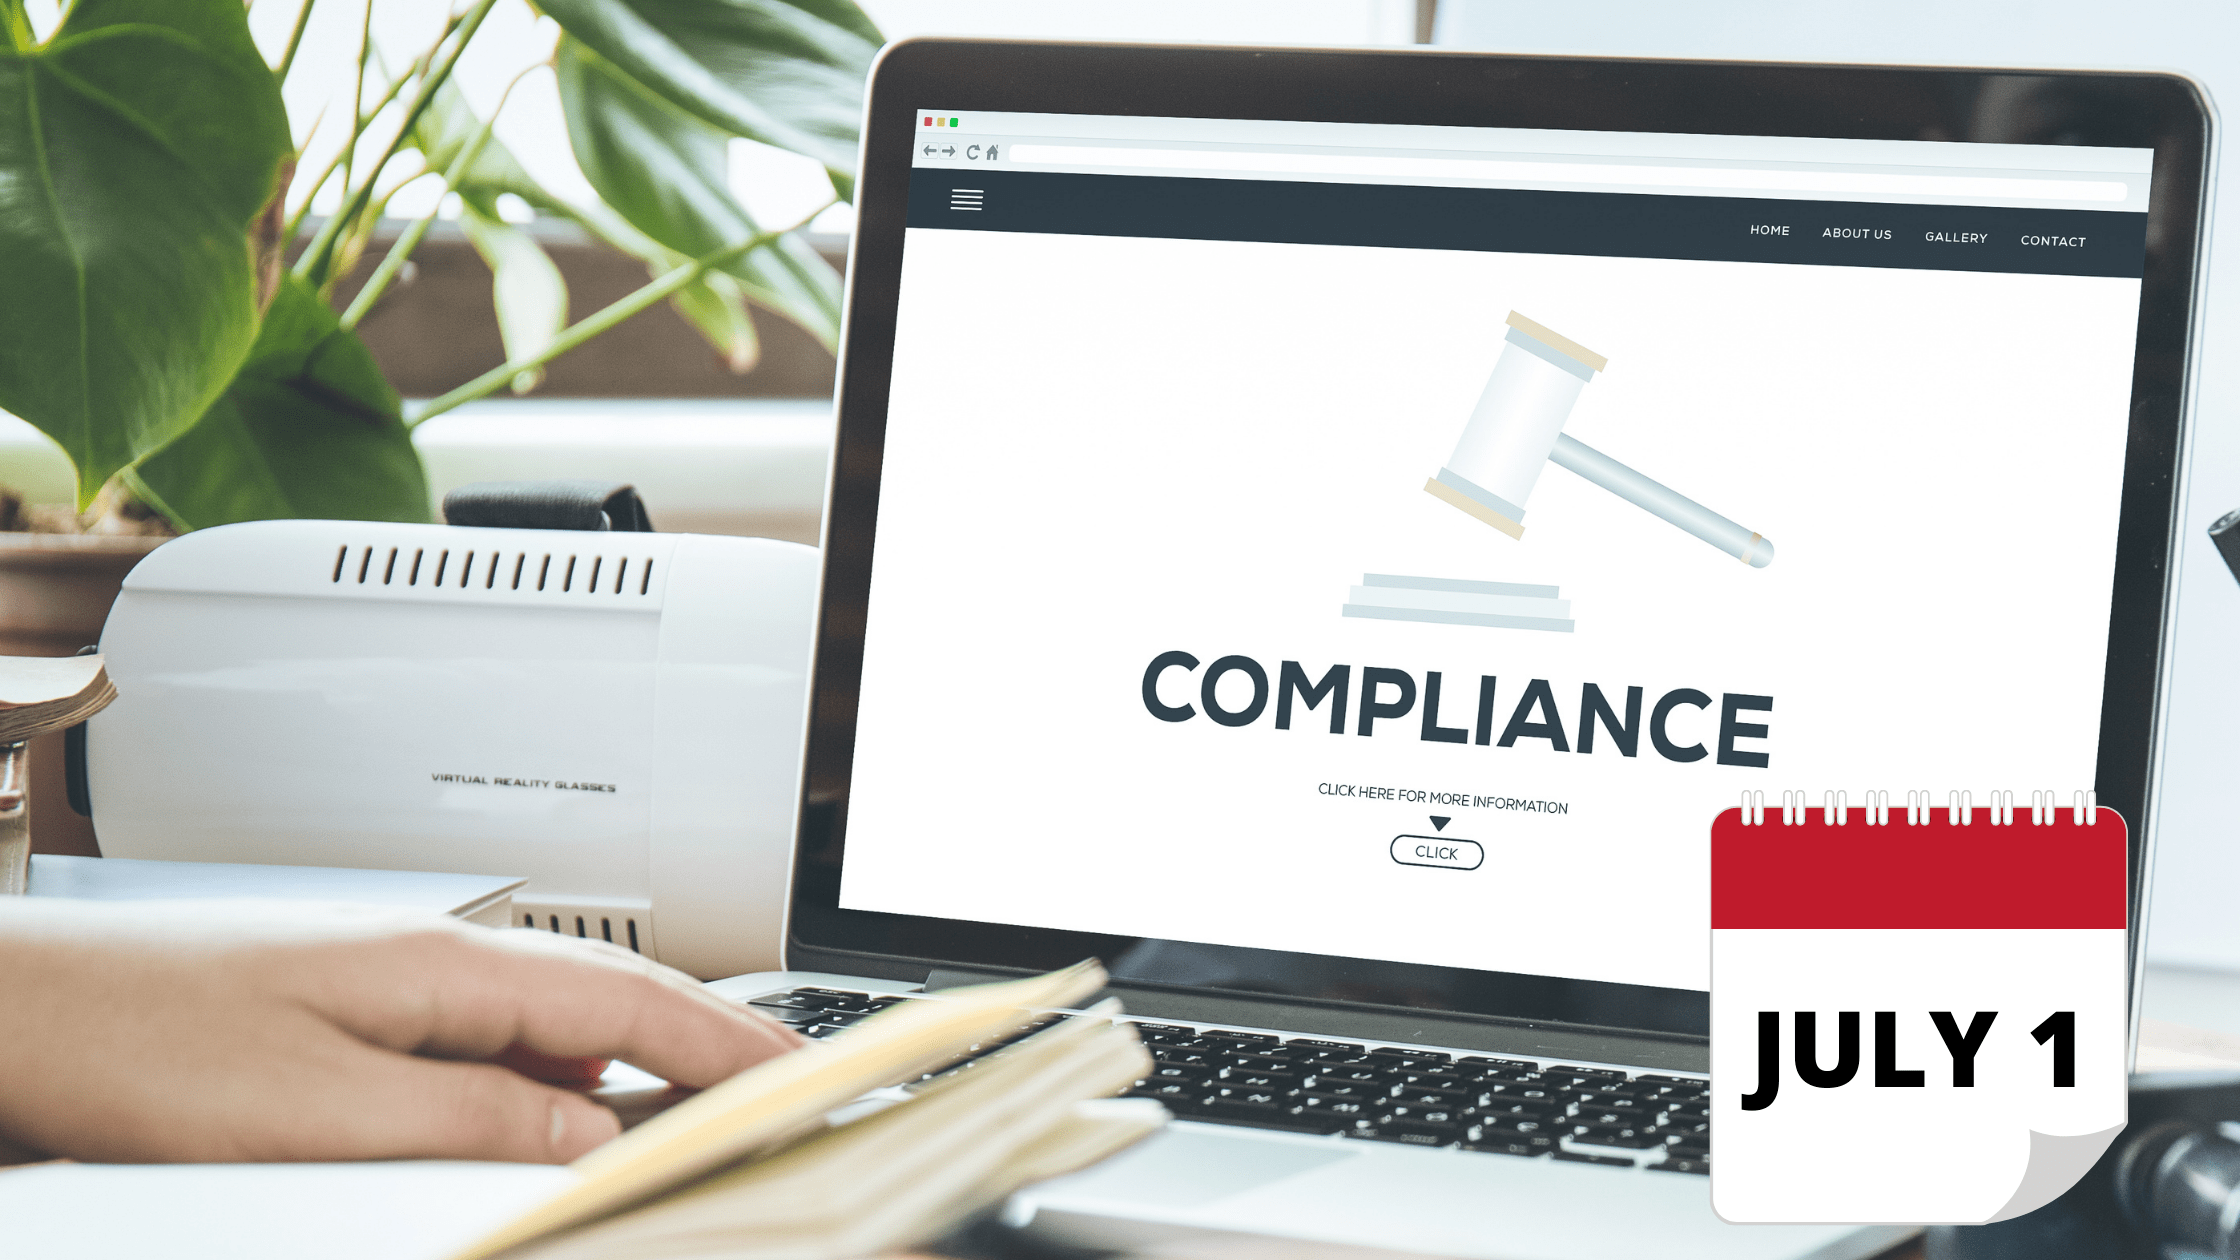 July 1st is Coming - Are You Compliant?